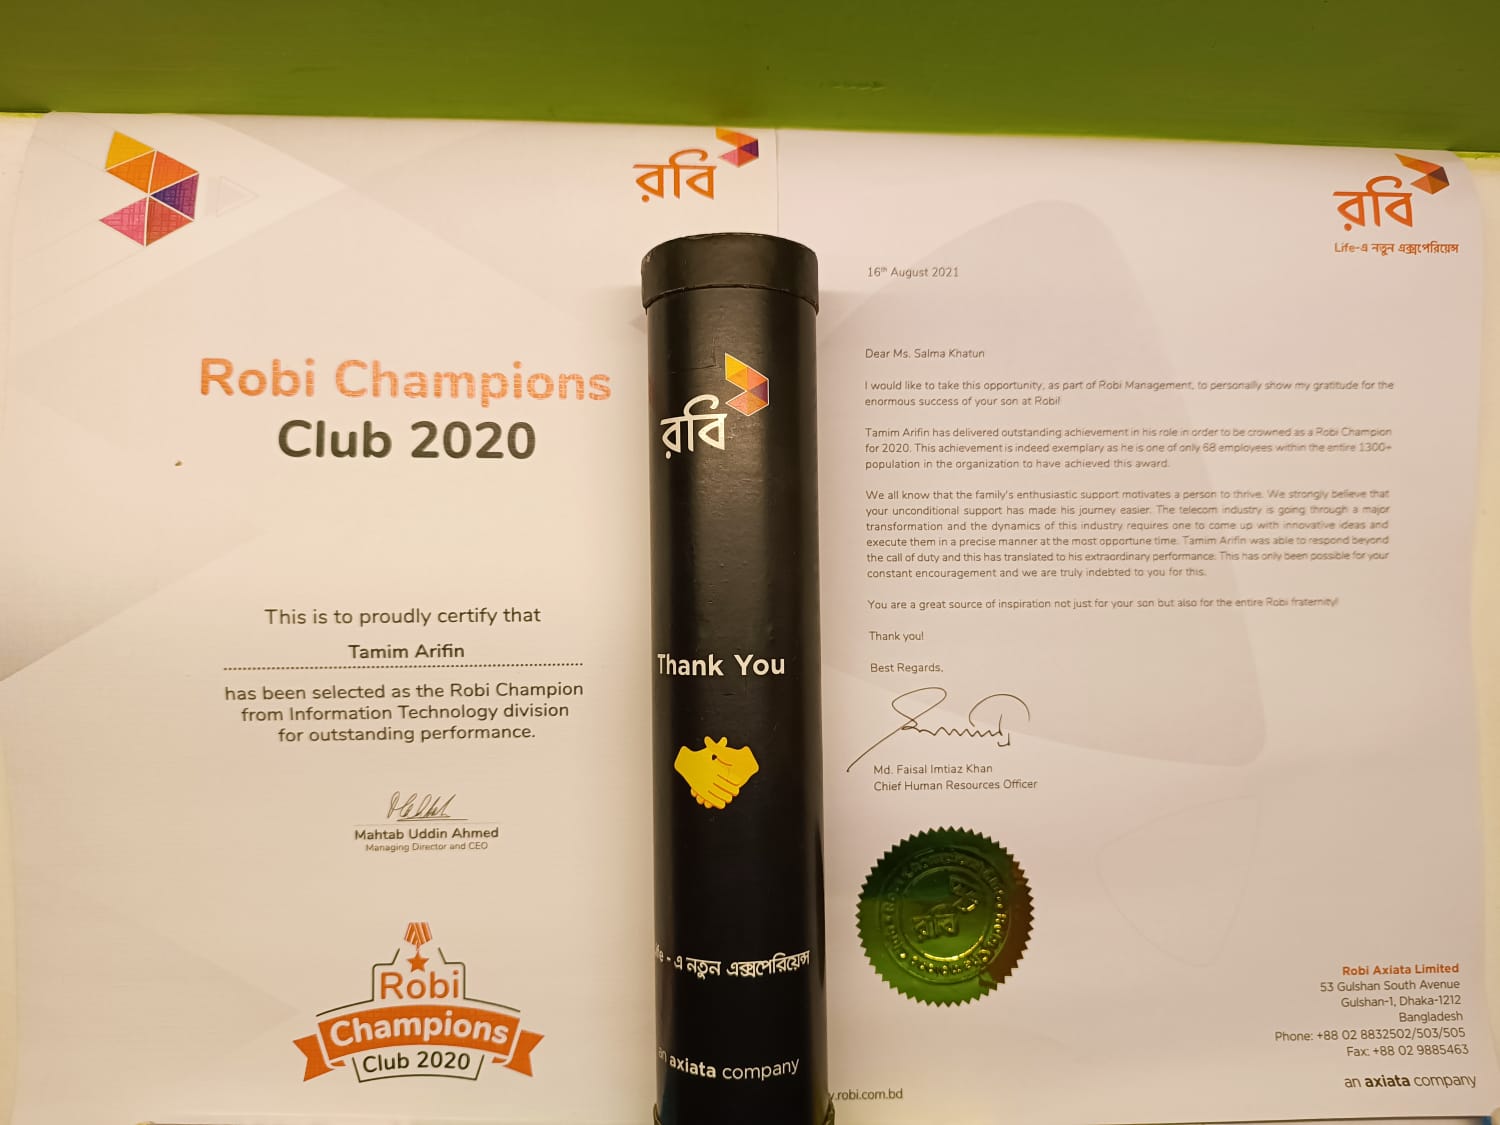 Awarded as Robi Champion at 2020 for Outstanding performance